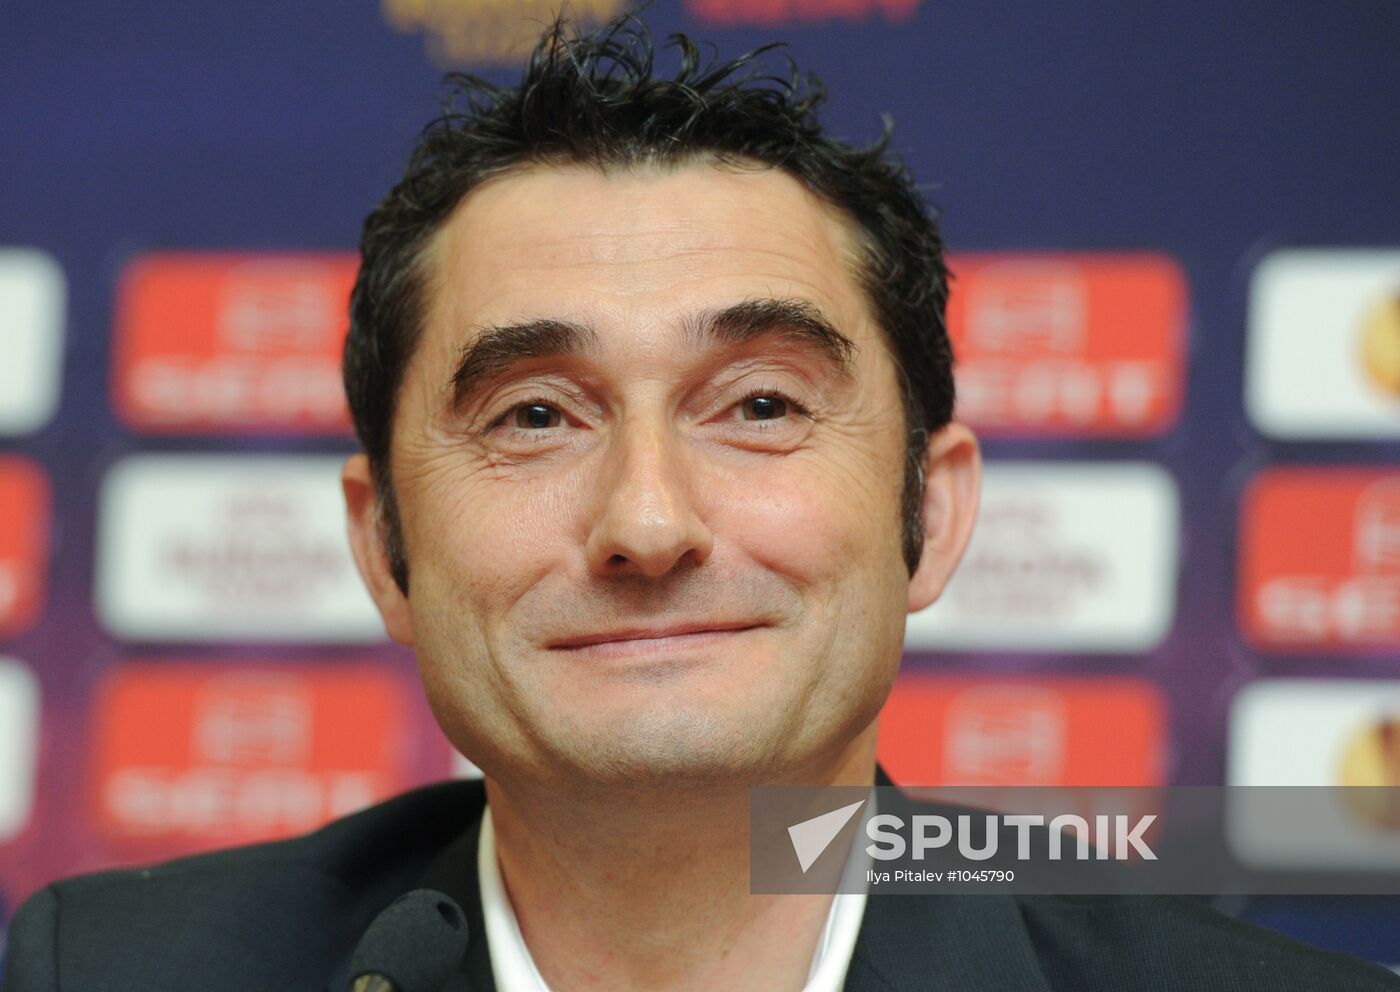 UEFA Europa League. Olympiacos Piraeus holds press conference